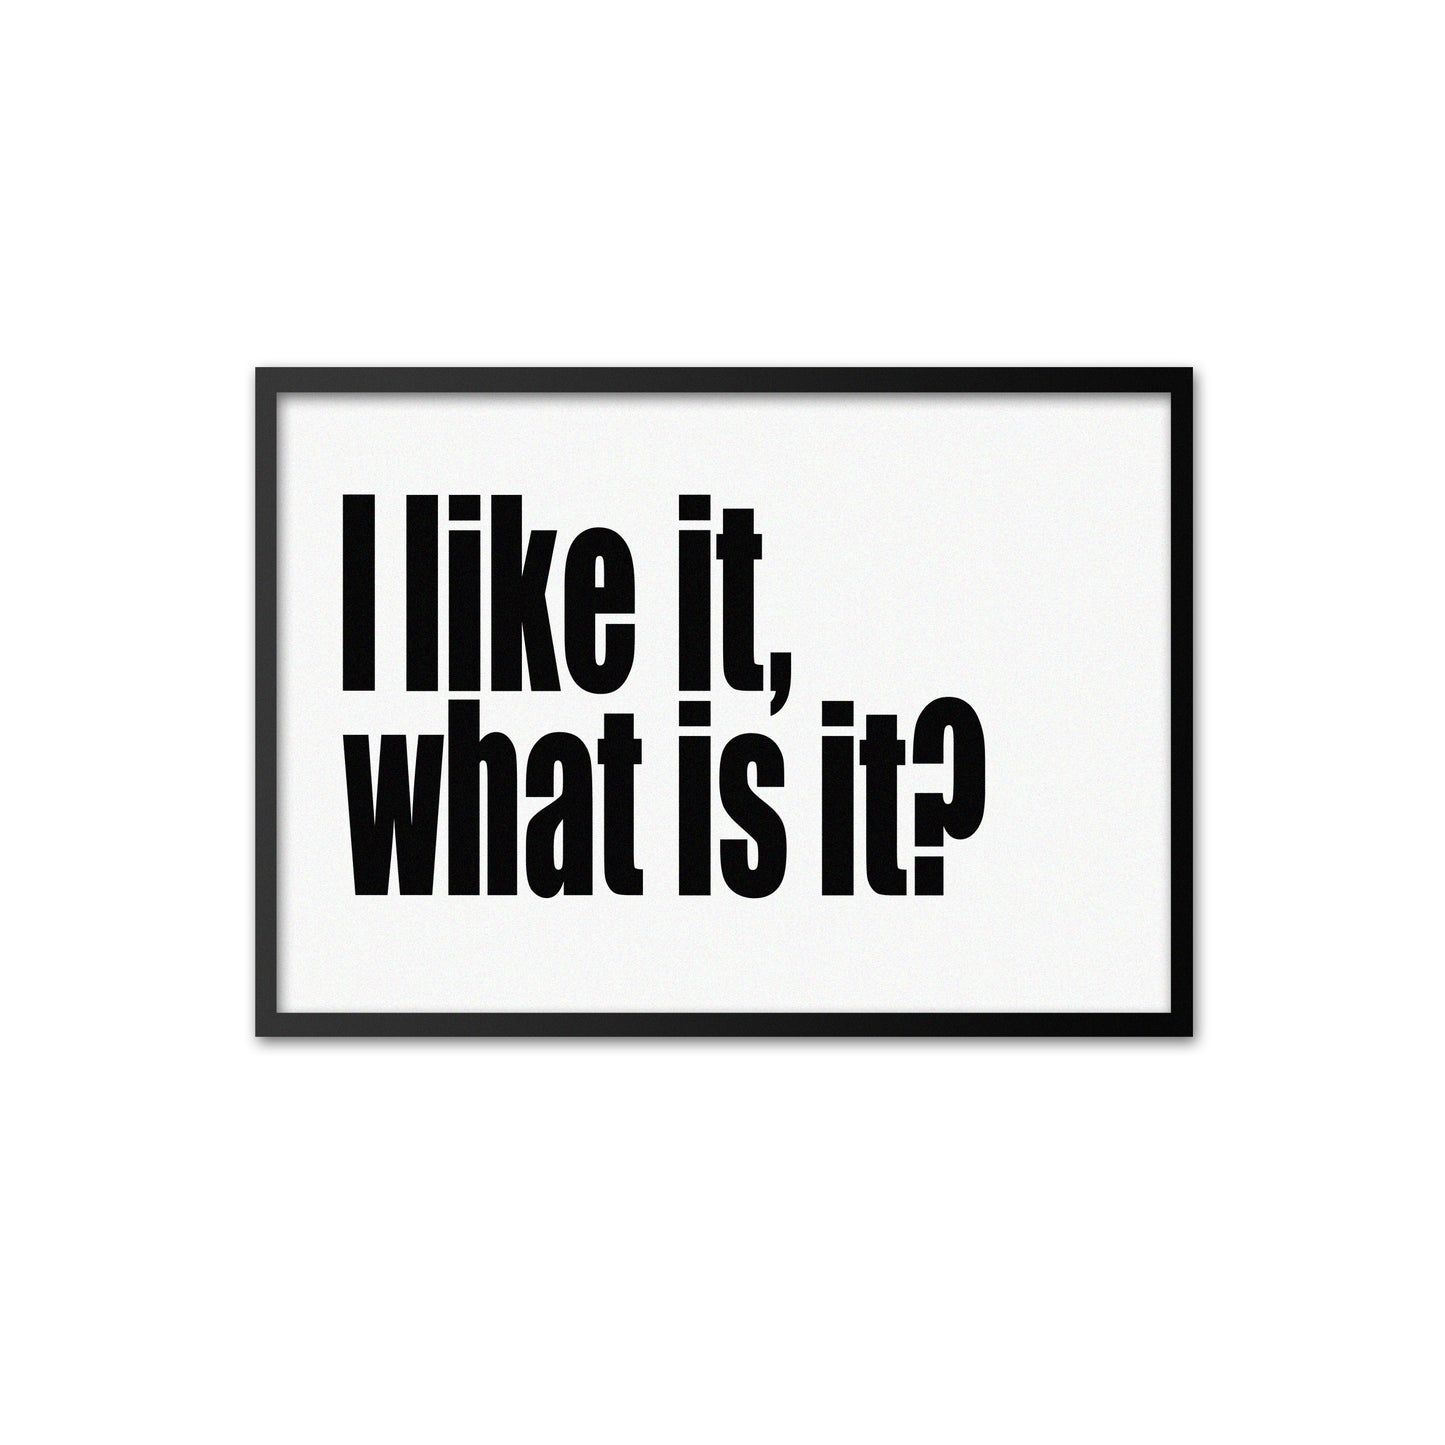 I like it, what is it? - black on white